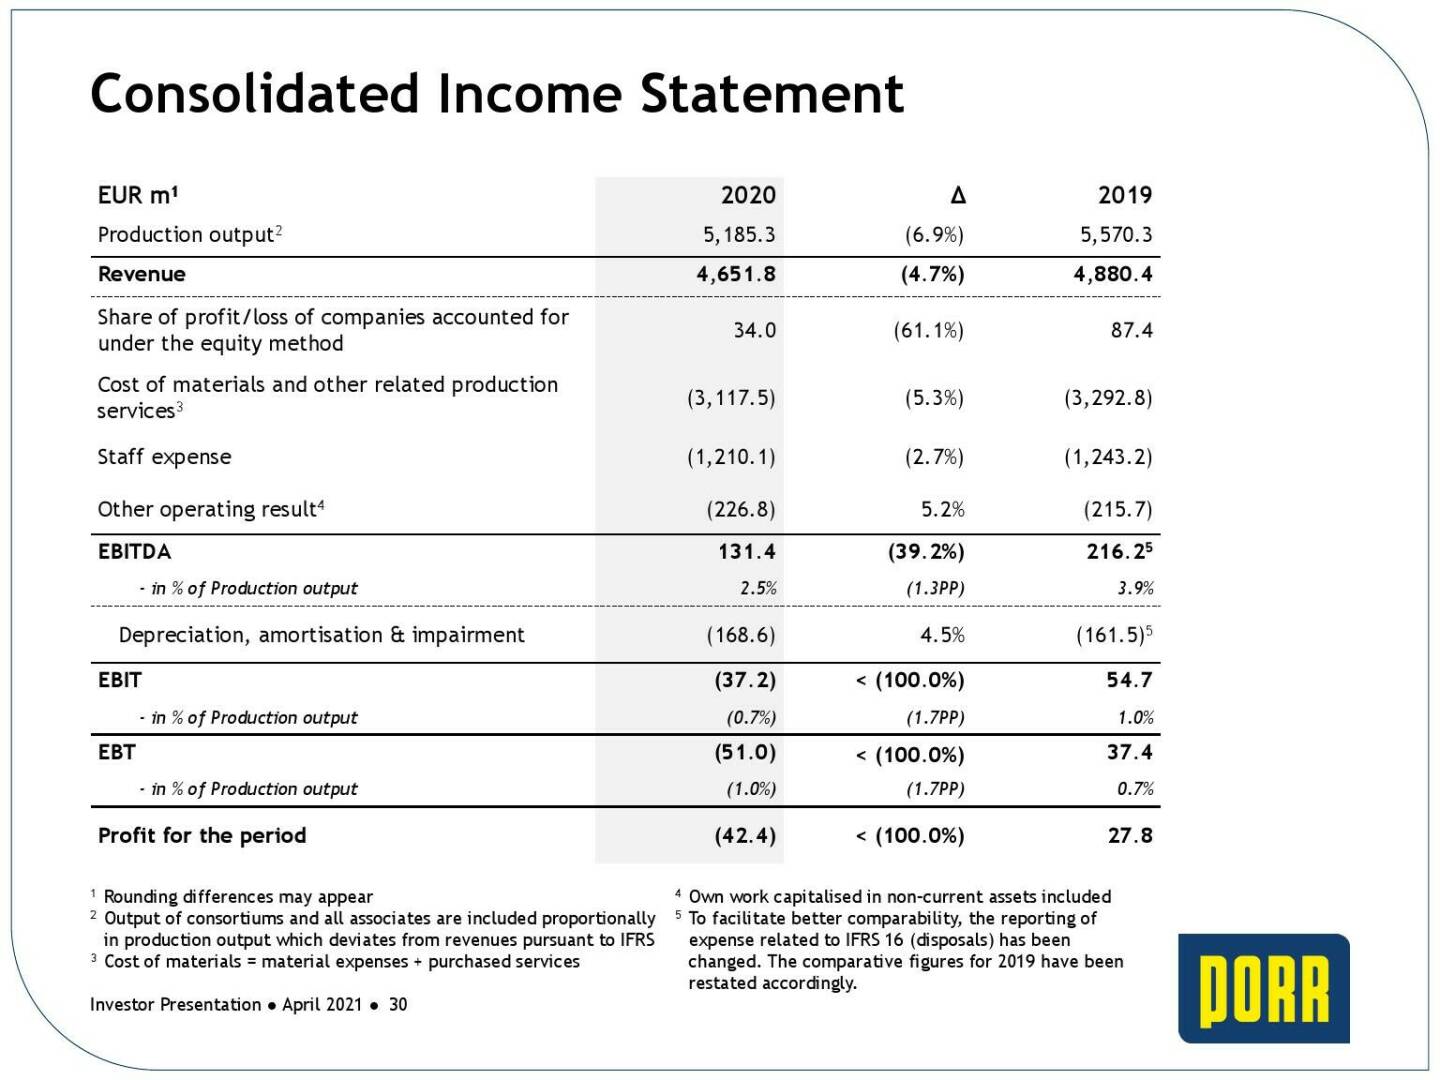 Porr - Consolidated income statement 